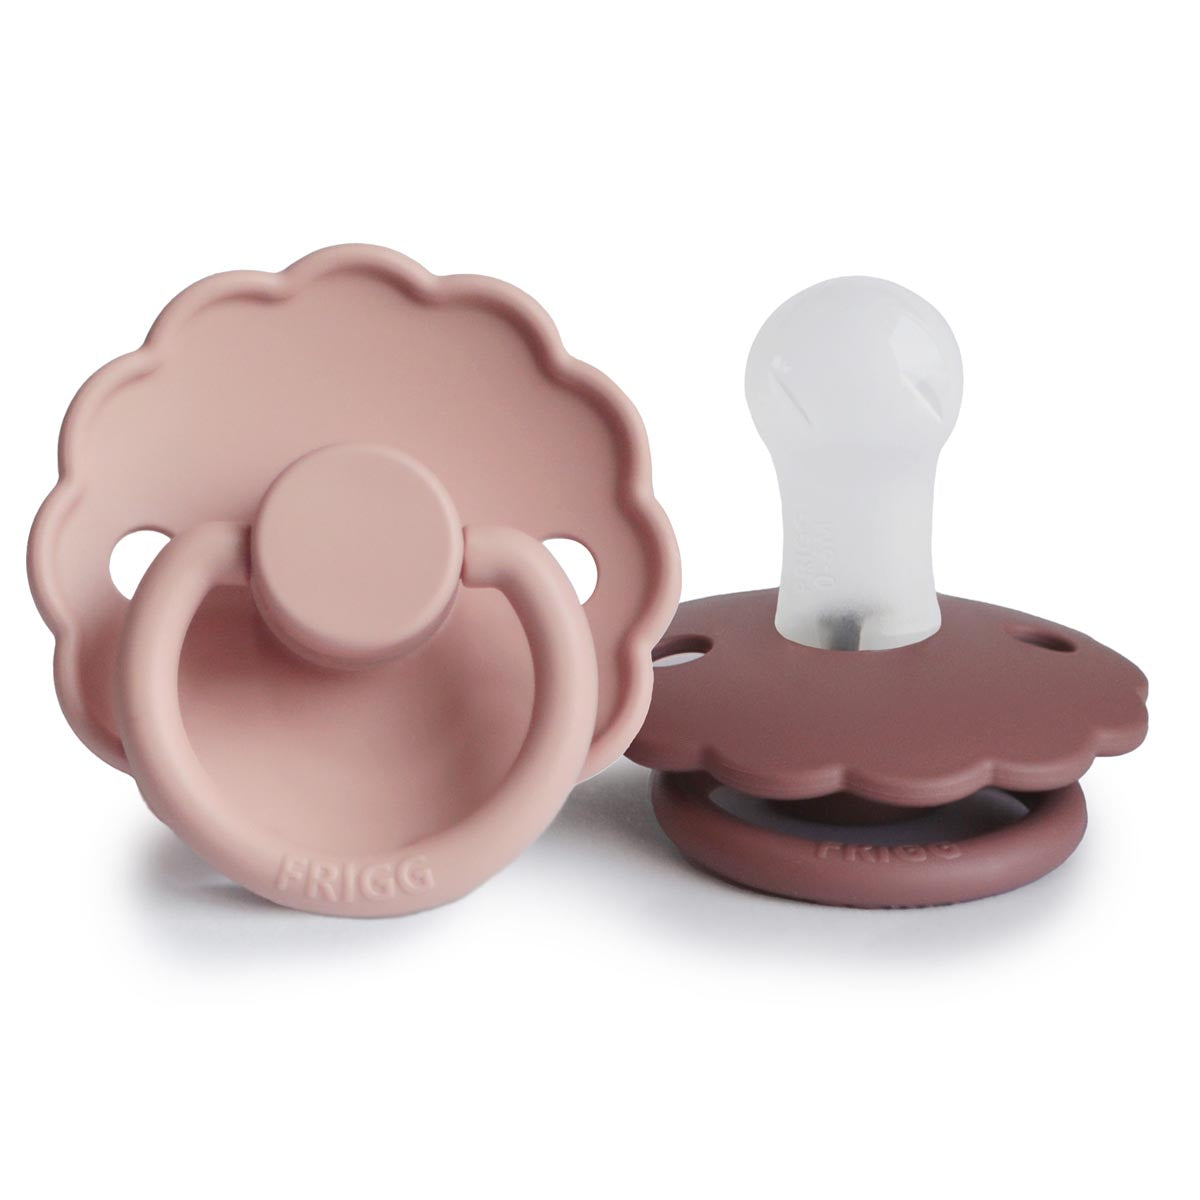 FRIGG Daisy Pacifier 2 Pack Silicone